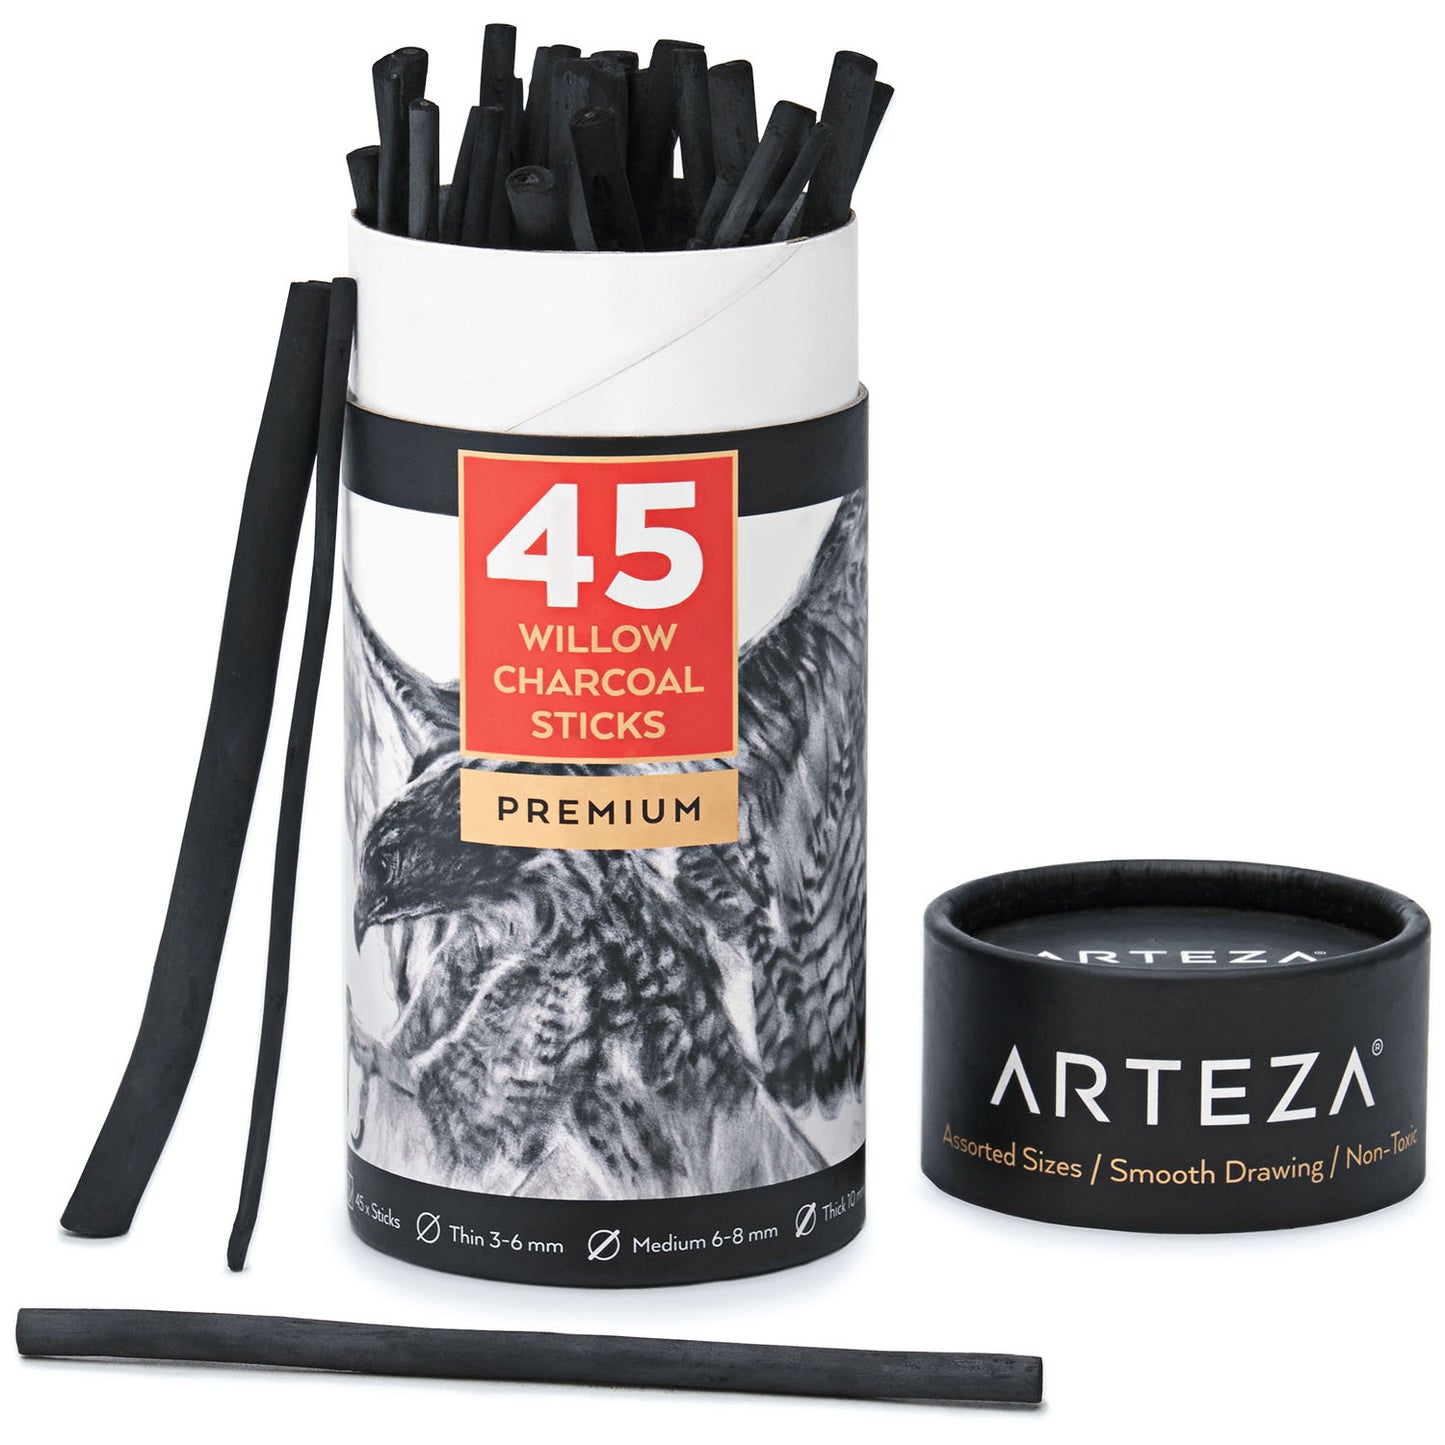 Willow Charcoal Sticks, Assorted Sizes - Set of 45 –